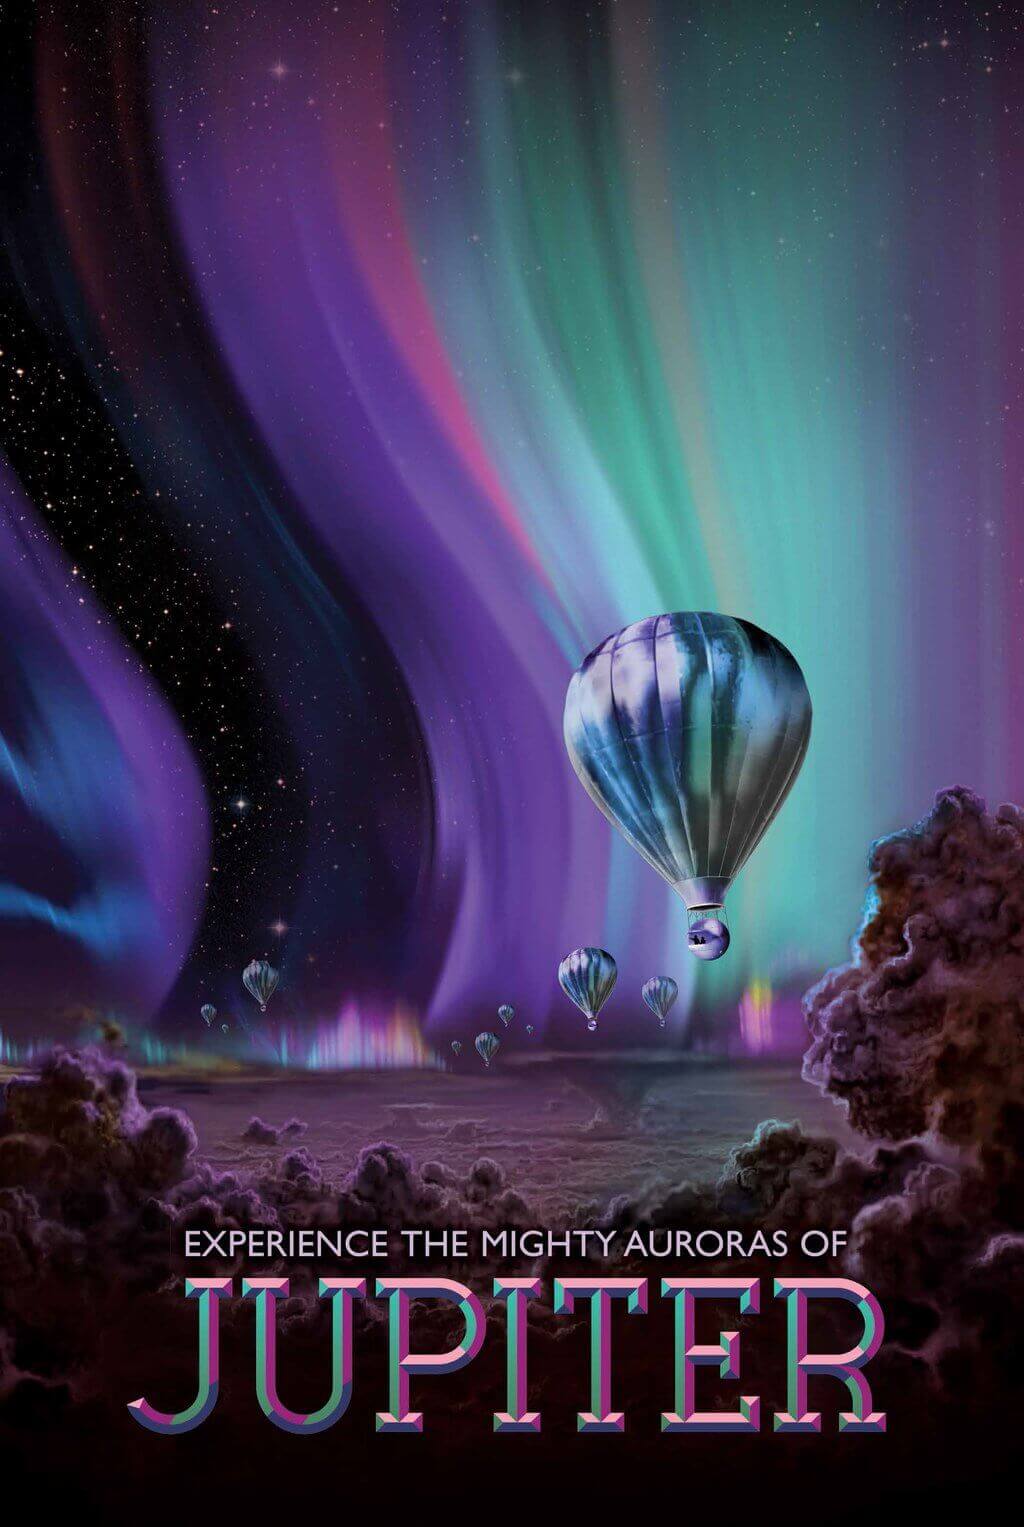 A photo illustration travel poster showing a cluster of metallic hot air balloons with spheroid gondolas floating above the opaque clouds of Jupiter’s atmosphere. Behind and above the balloons is a sweeping aurora of teal and purple against a black starry sky. The advertisement reads “Experience the mighty auroras of Jupiter” in metallic block text at the bottom of the poster.